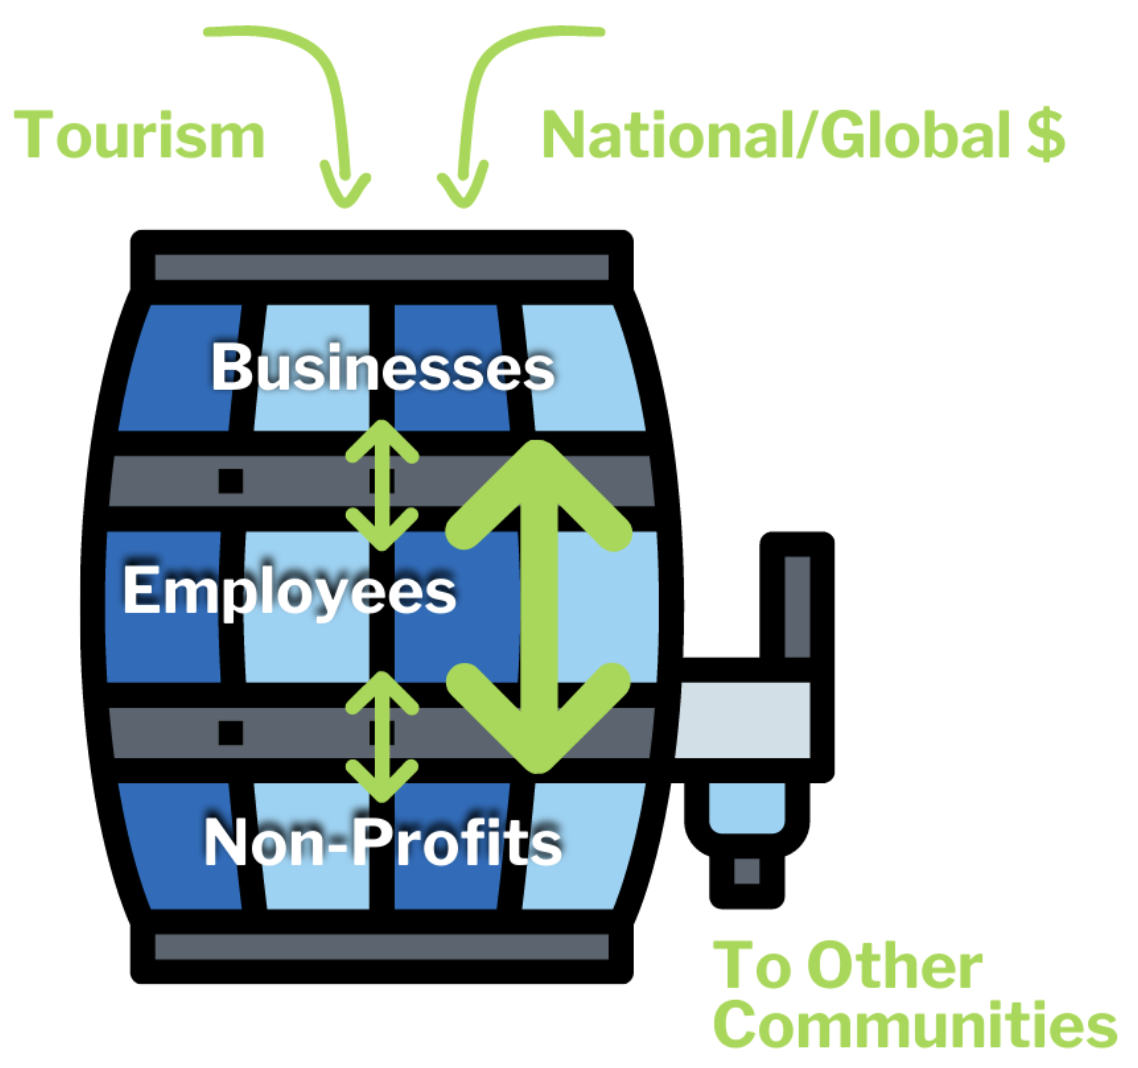 Economy as a Barrel with tourism and national/global money coming in, money circulating in the barrel among businesse,s employees & nonprofits and a spigot on the side with money leaking to other communities